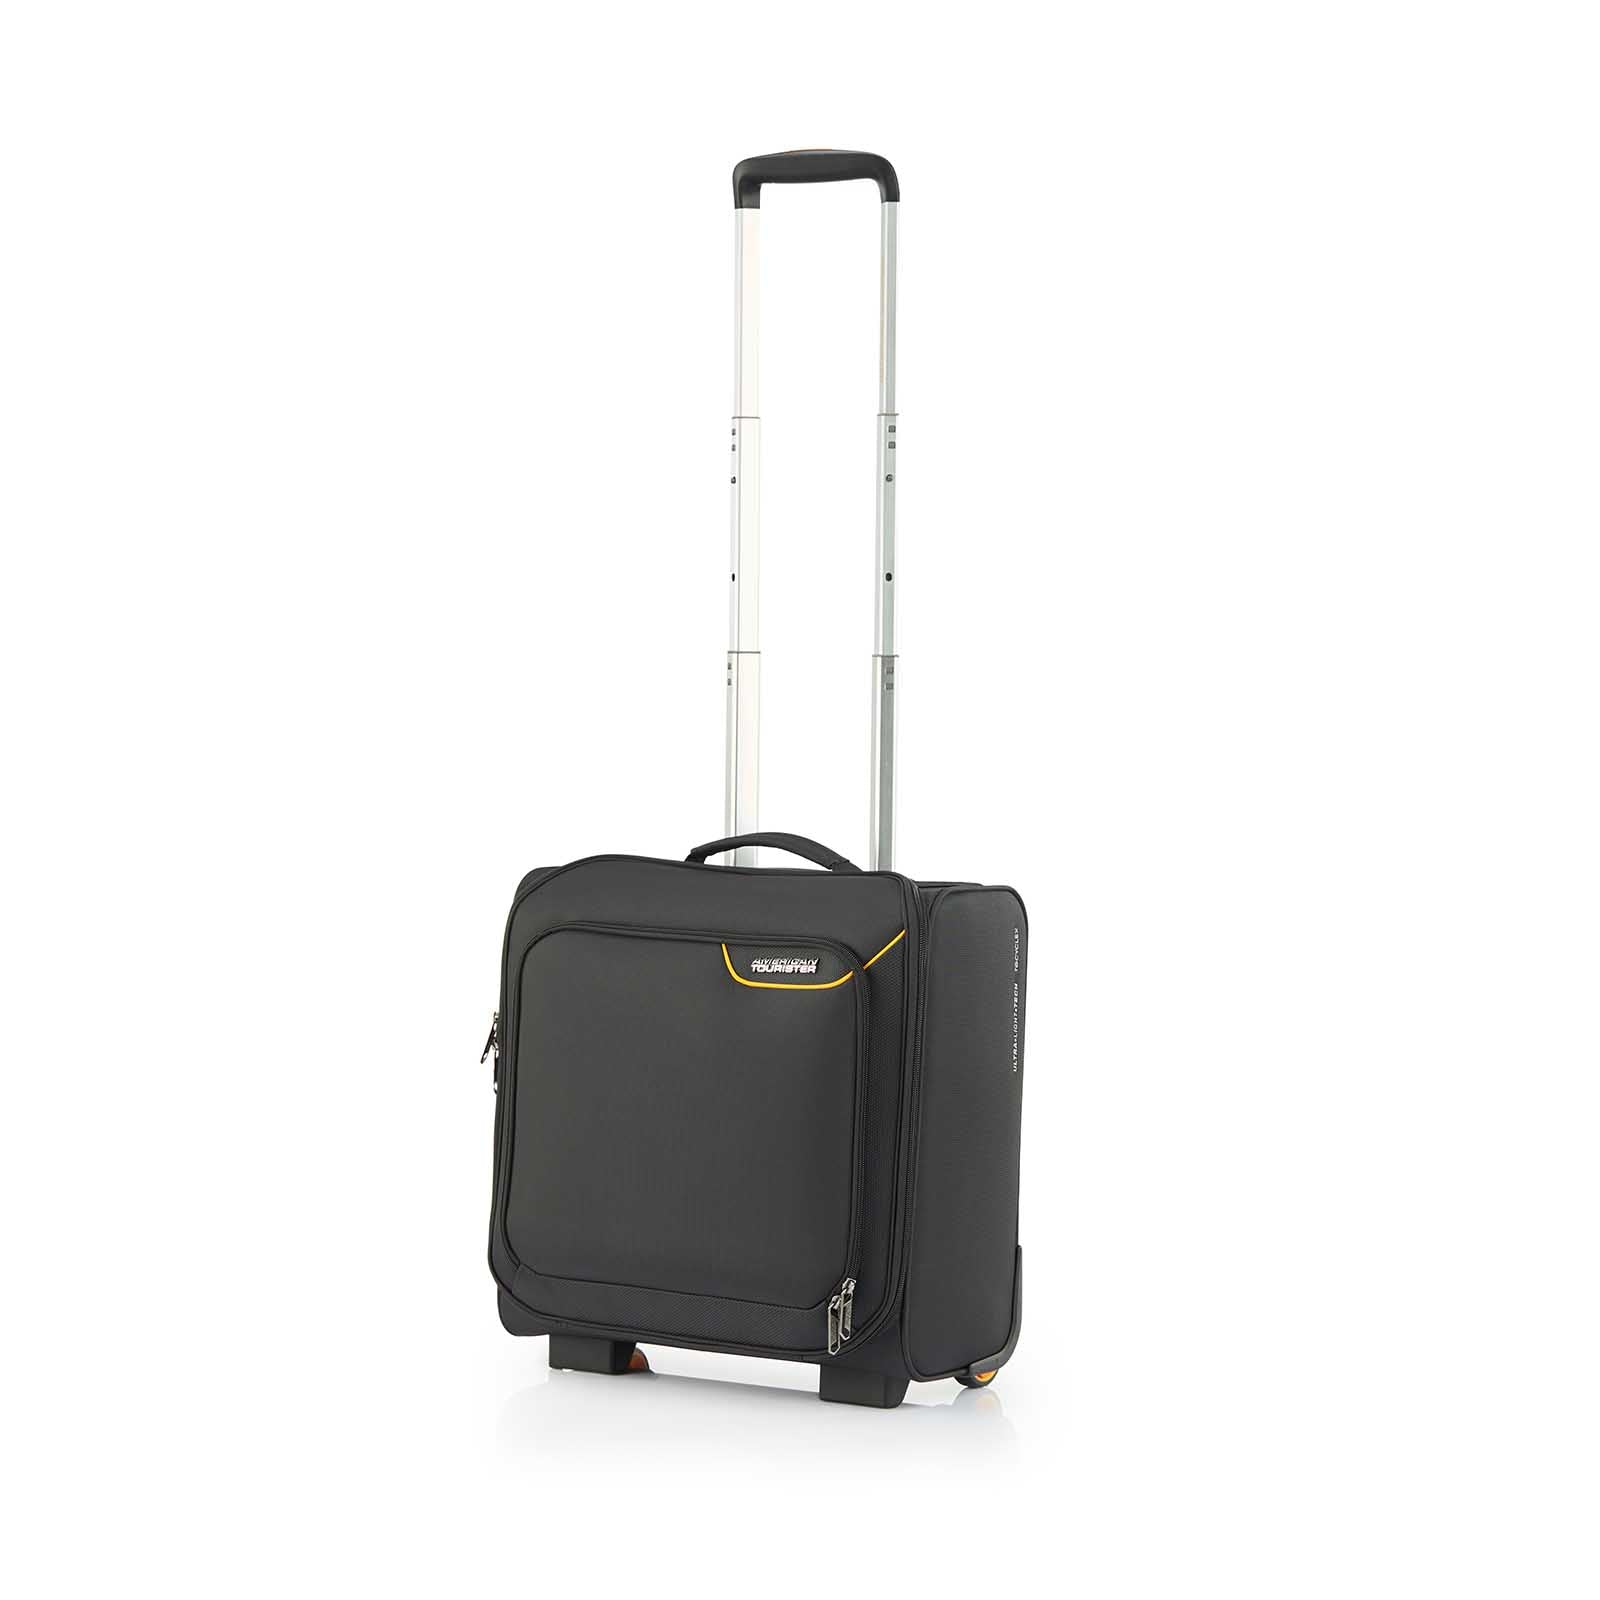 American-Tourister-Applite-4-Eco-Underseater-Suitcase-Black-Mustard-Front-Angle